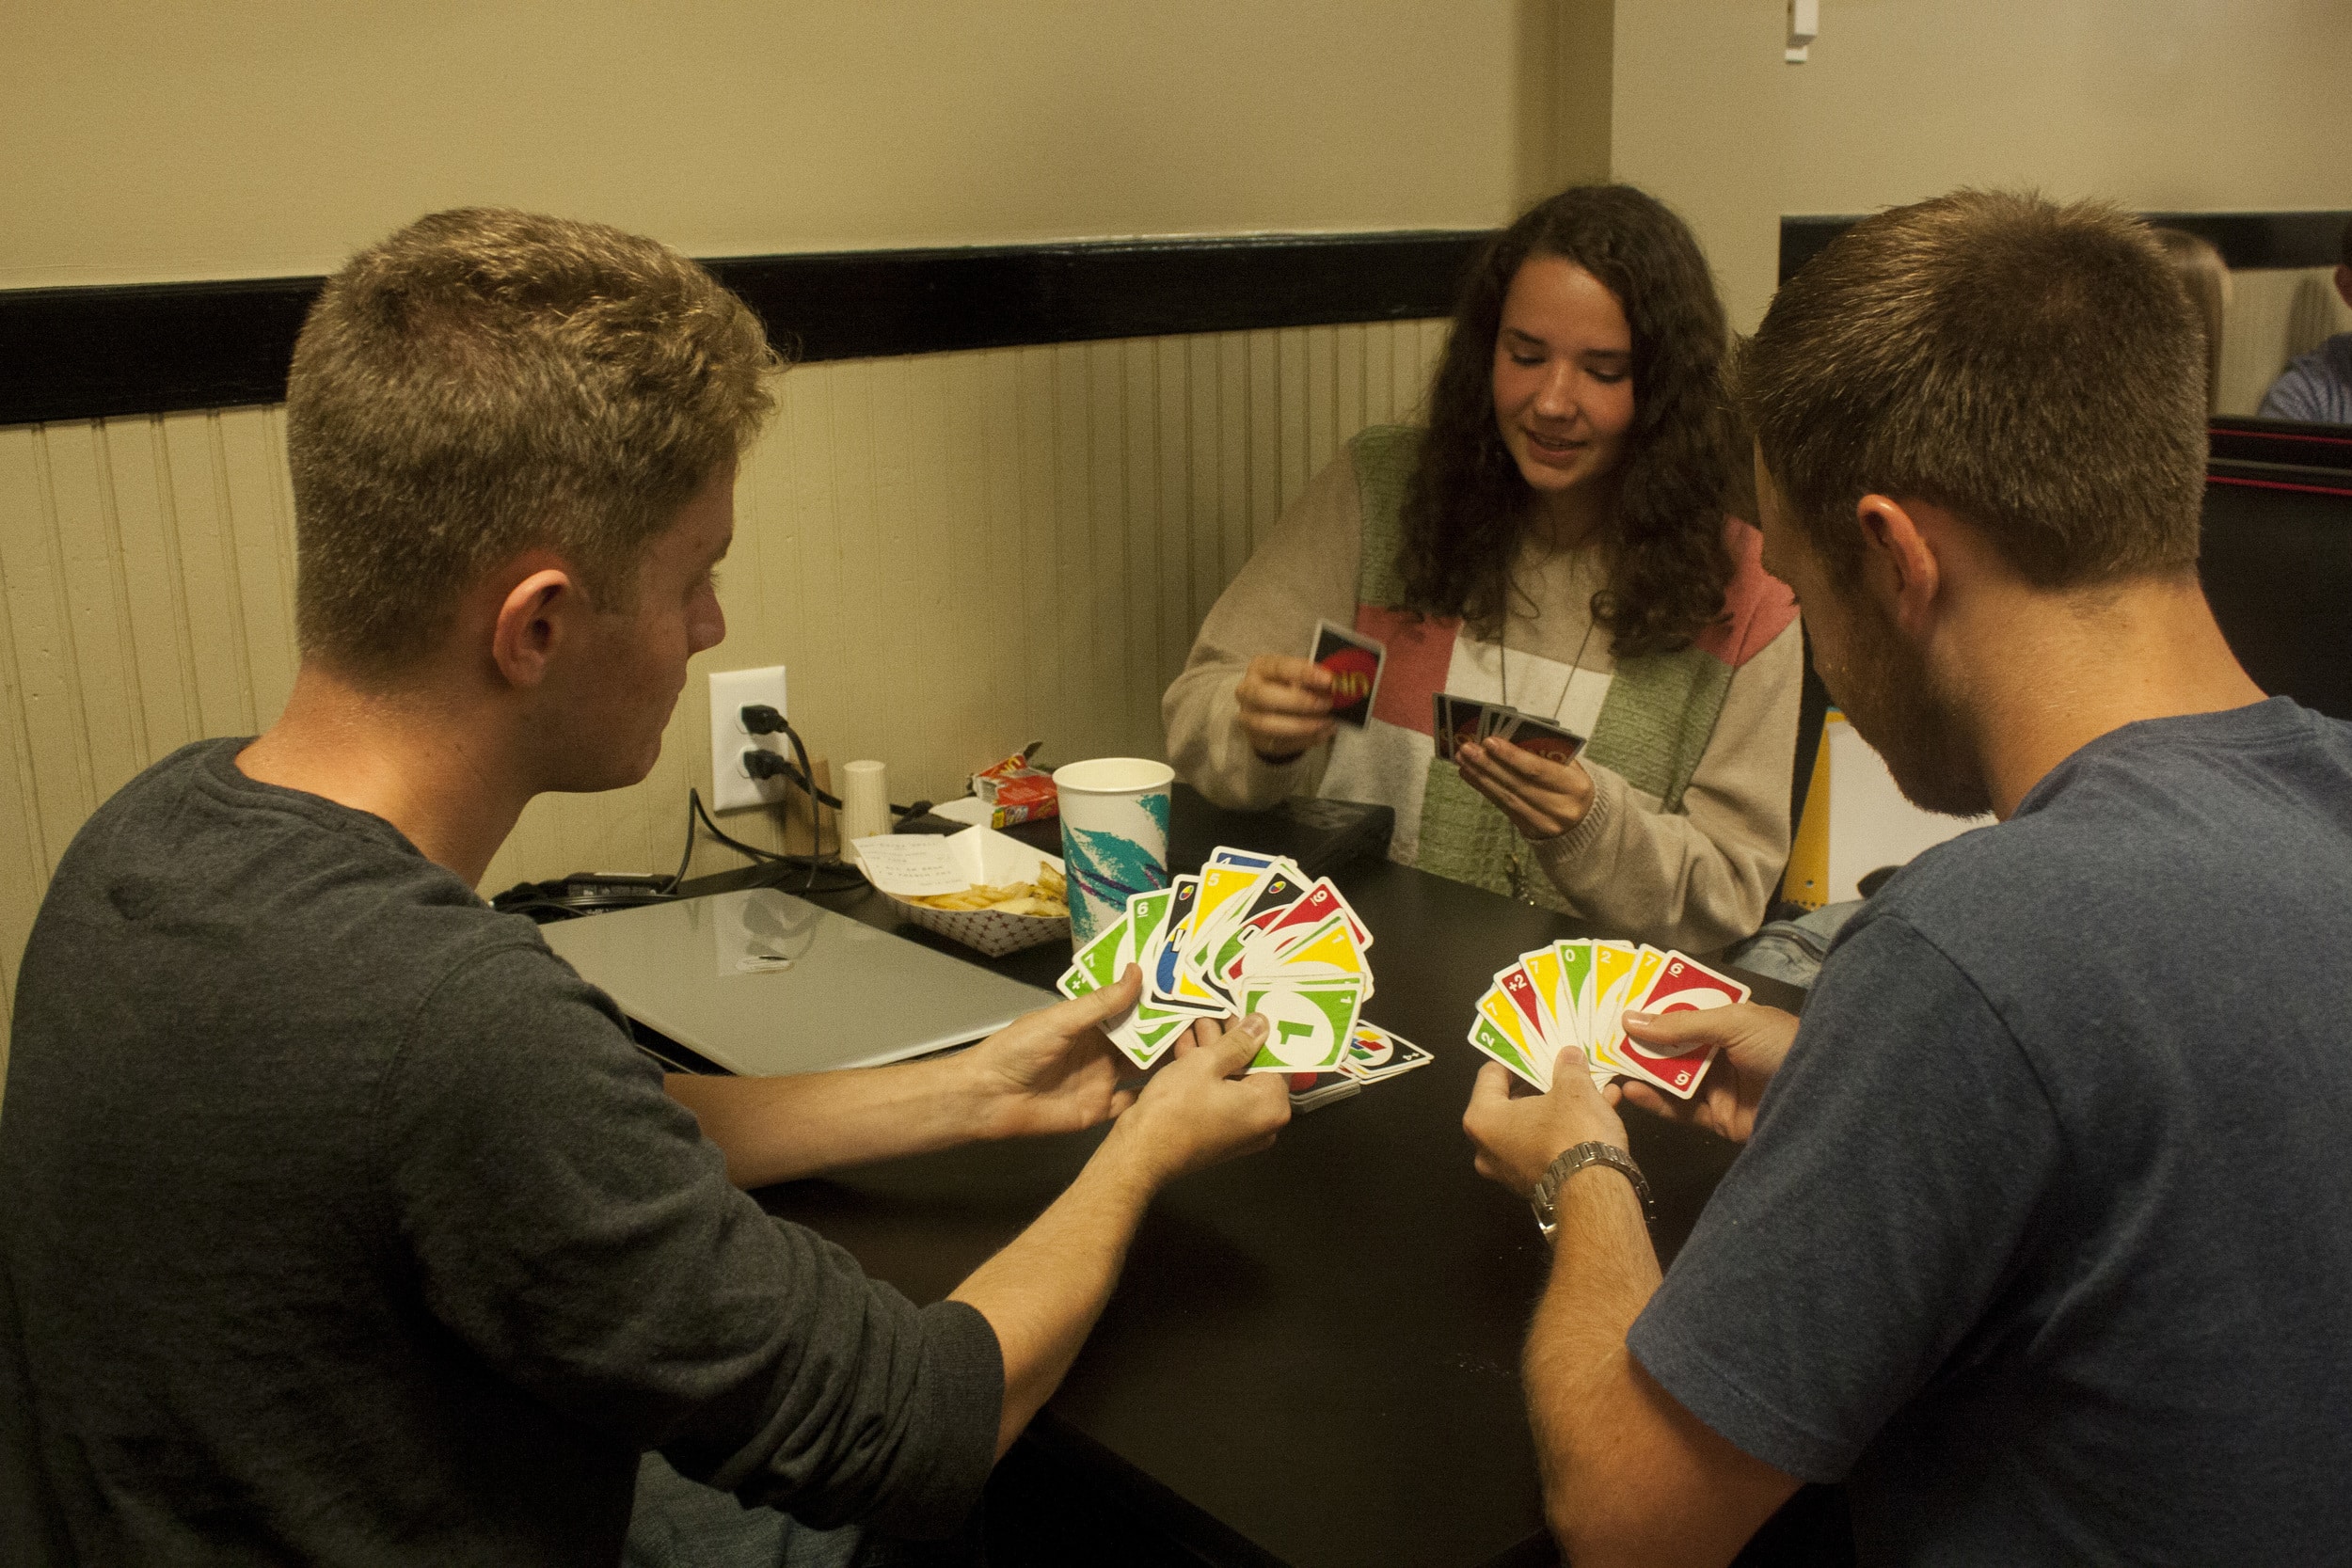 Wes Wessinger, junior, Bethany Stickley, sphomore, and Brandon Lee, junior, hang out in the stud playing a game of cards.